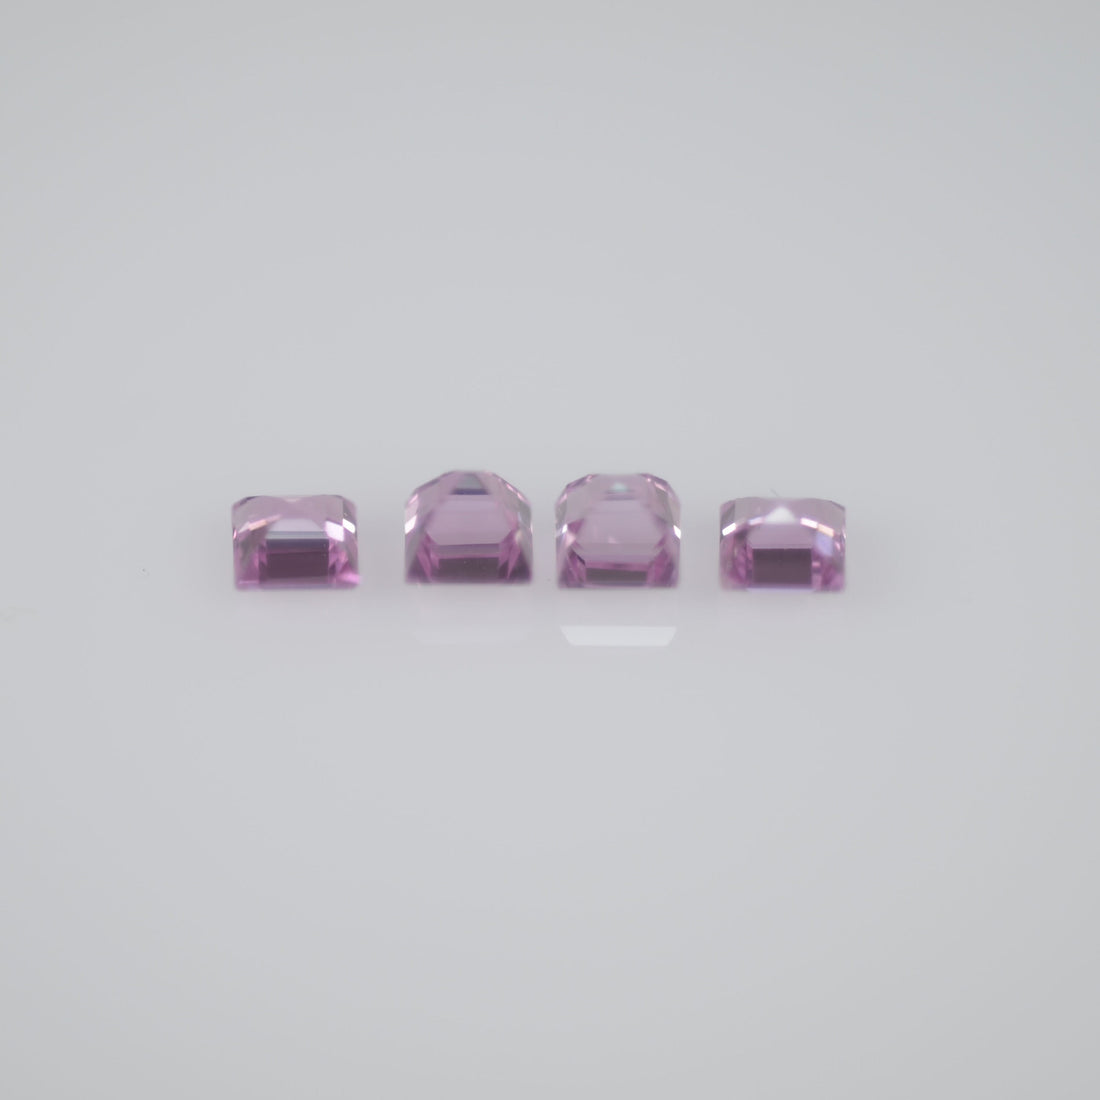 1.8-3.3 mm Natural Callibrated Pink Sapphire Loose Gemstone Square Cut